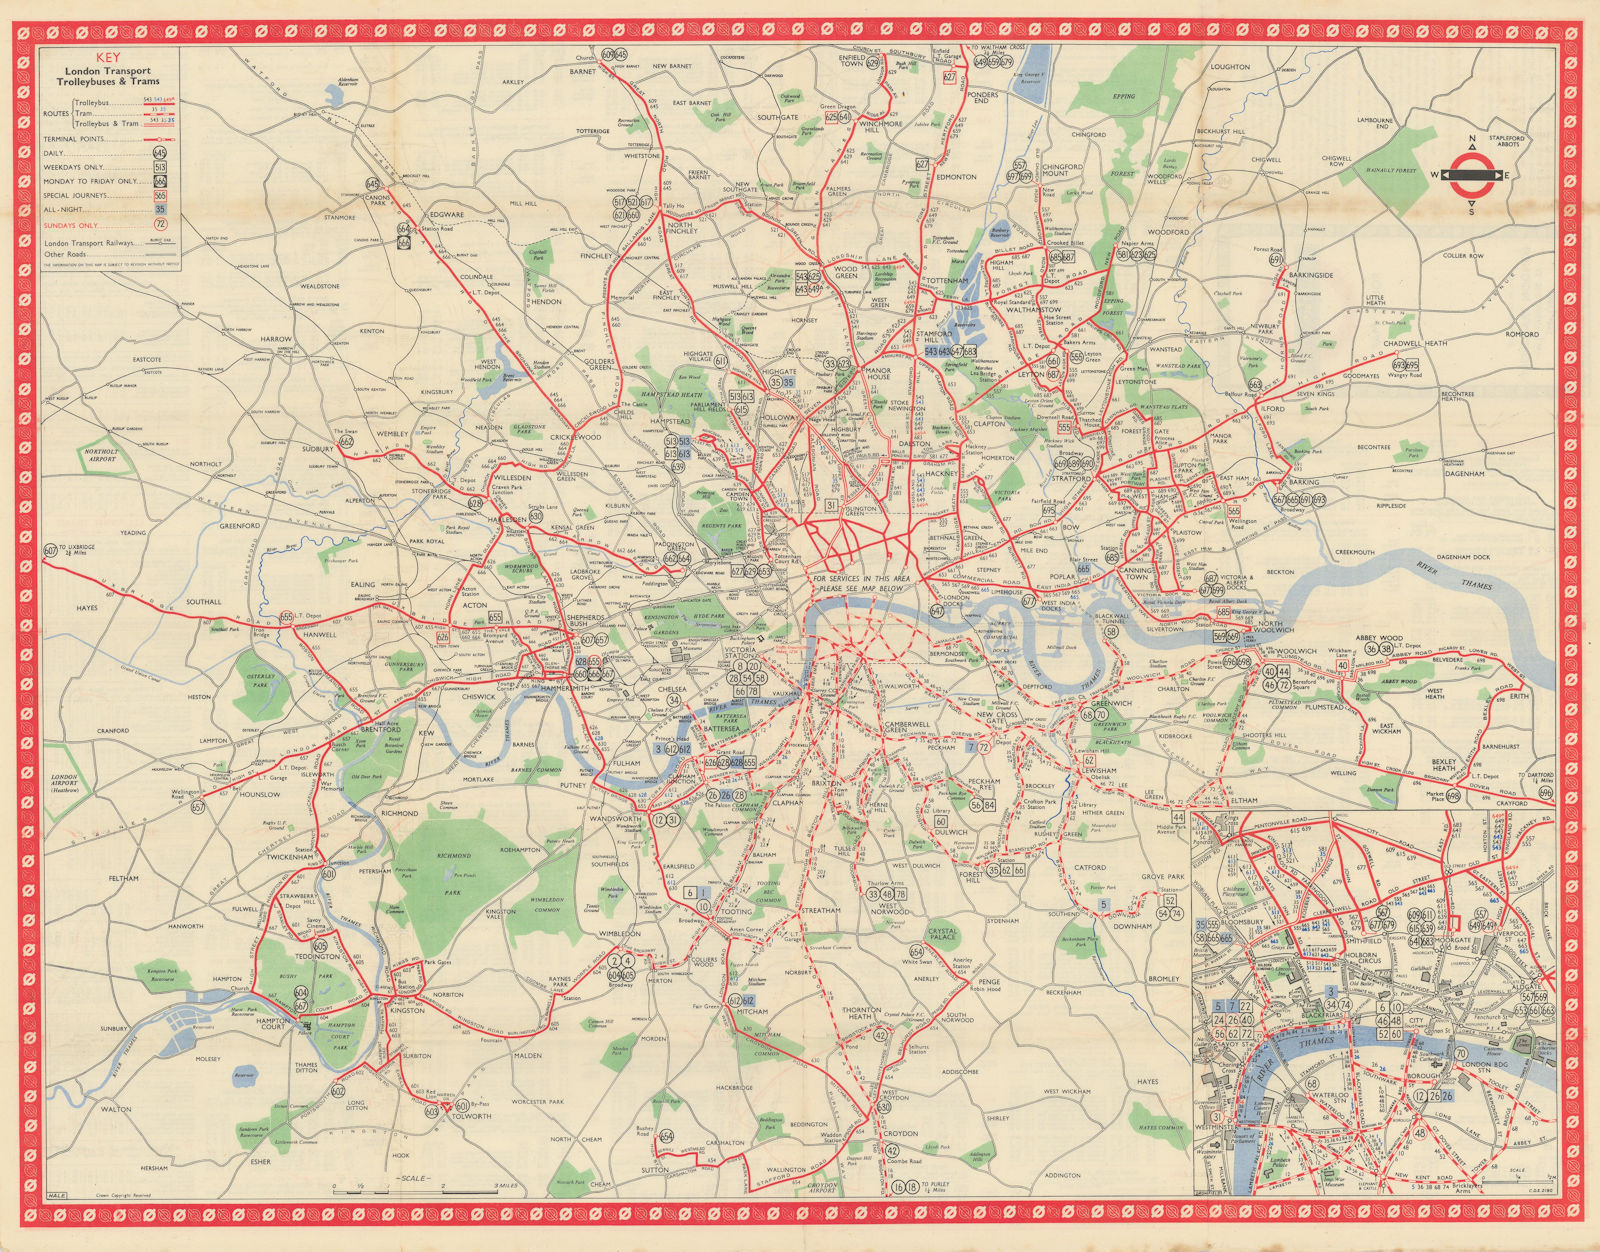 Associate Product London Transport Trolleybus & Tram route map. 650. HALE January 1950 old